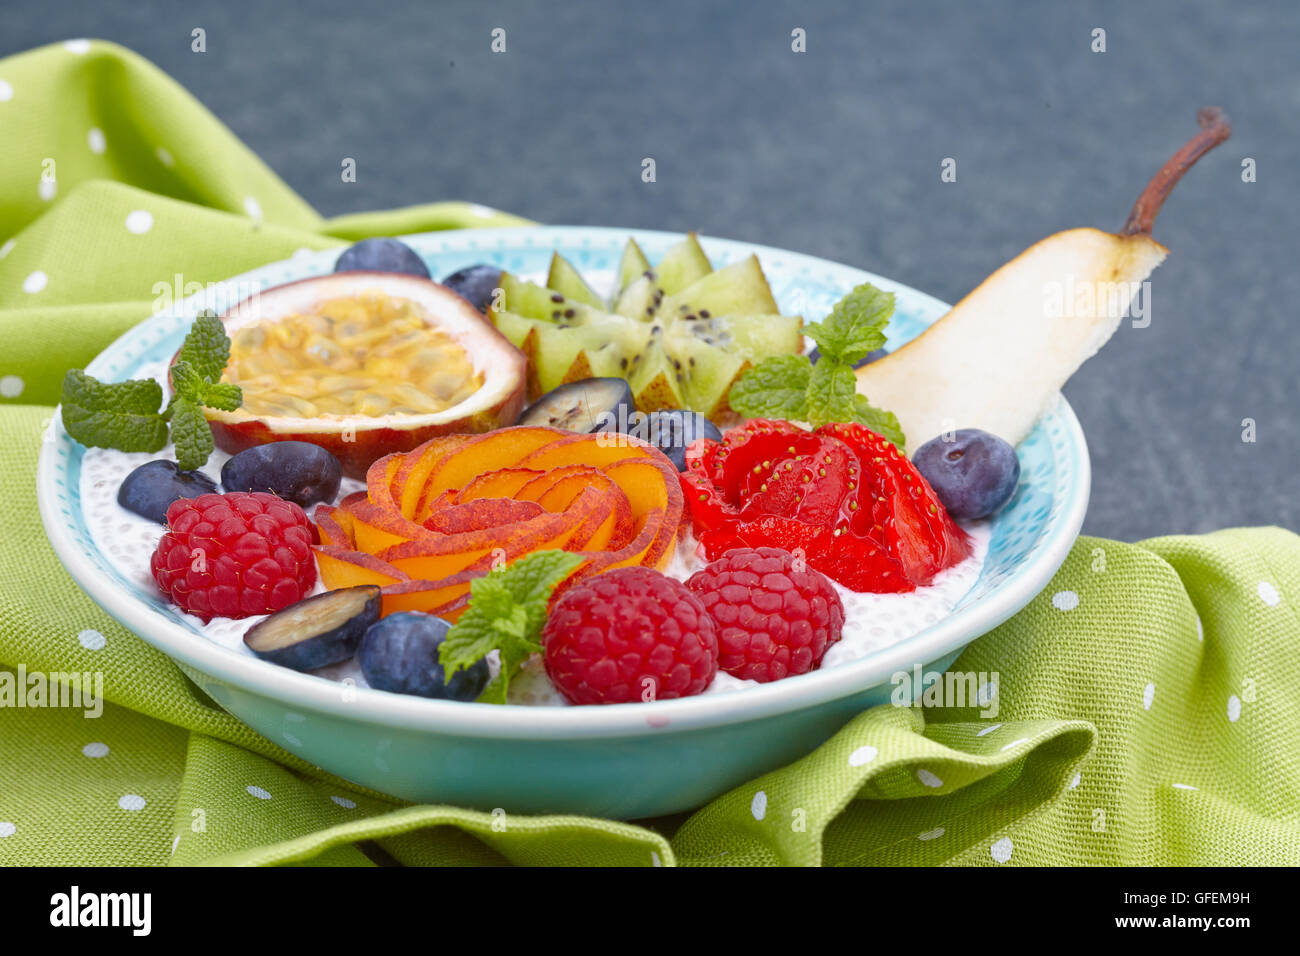 Chia seed pudding decorated with fruits and berries Stock Photo